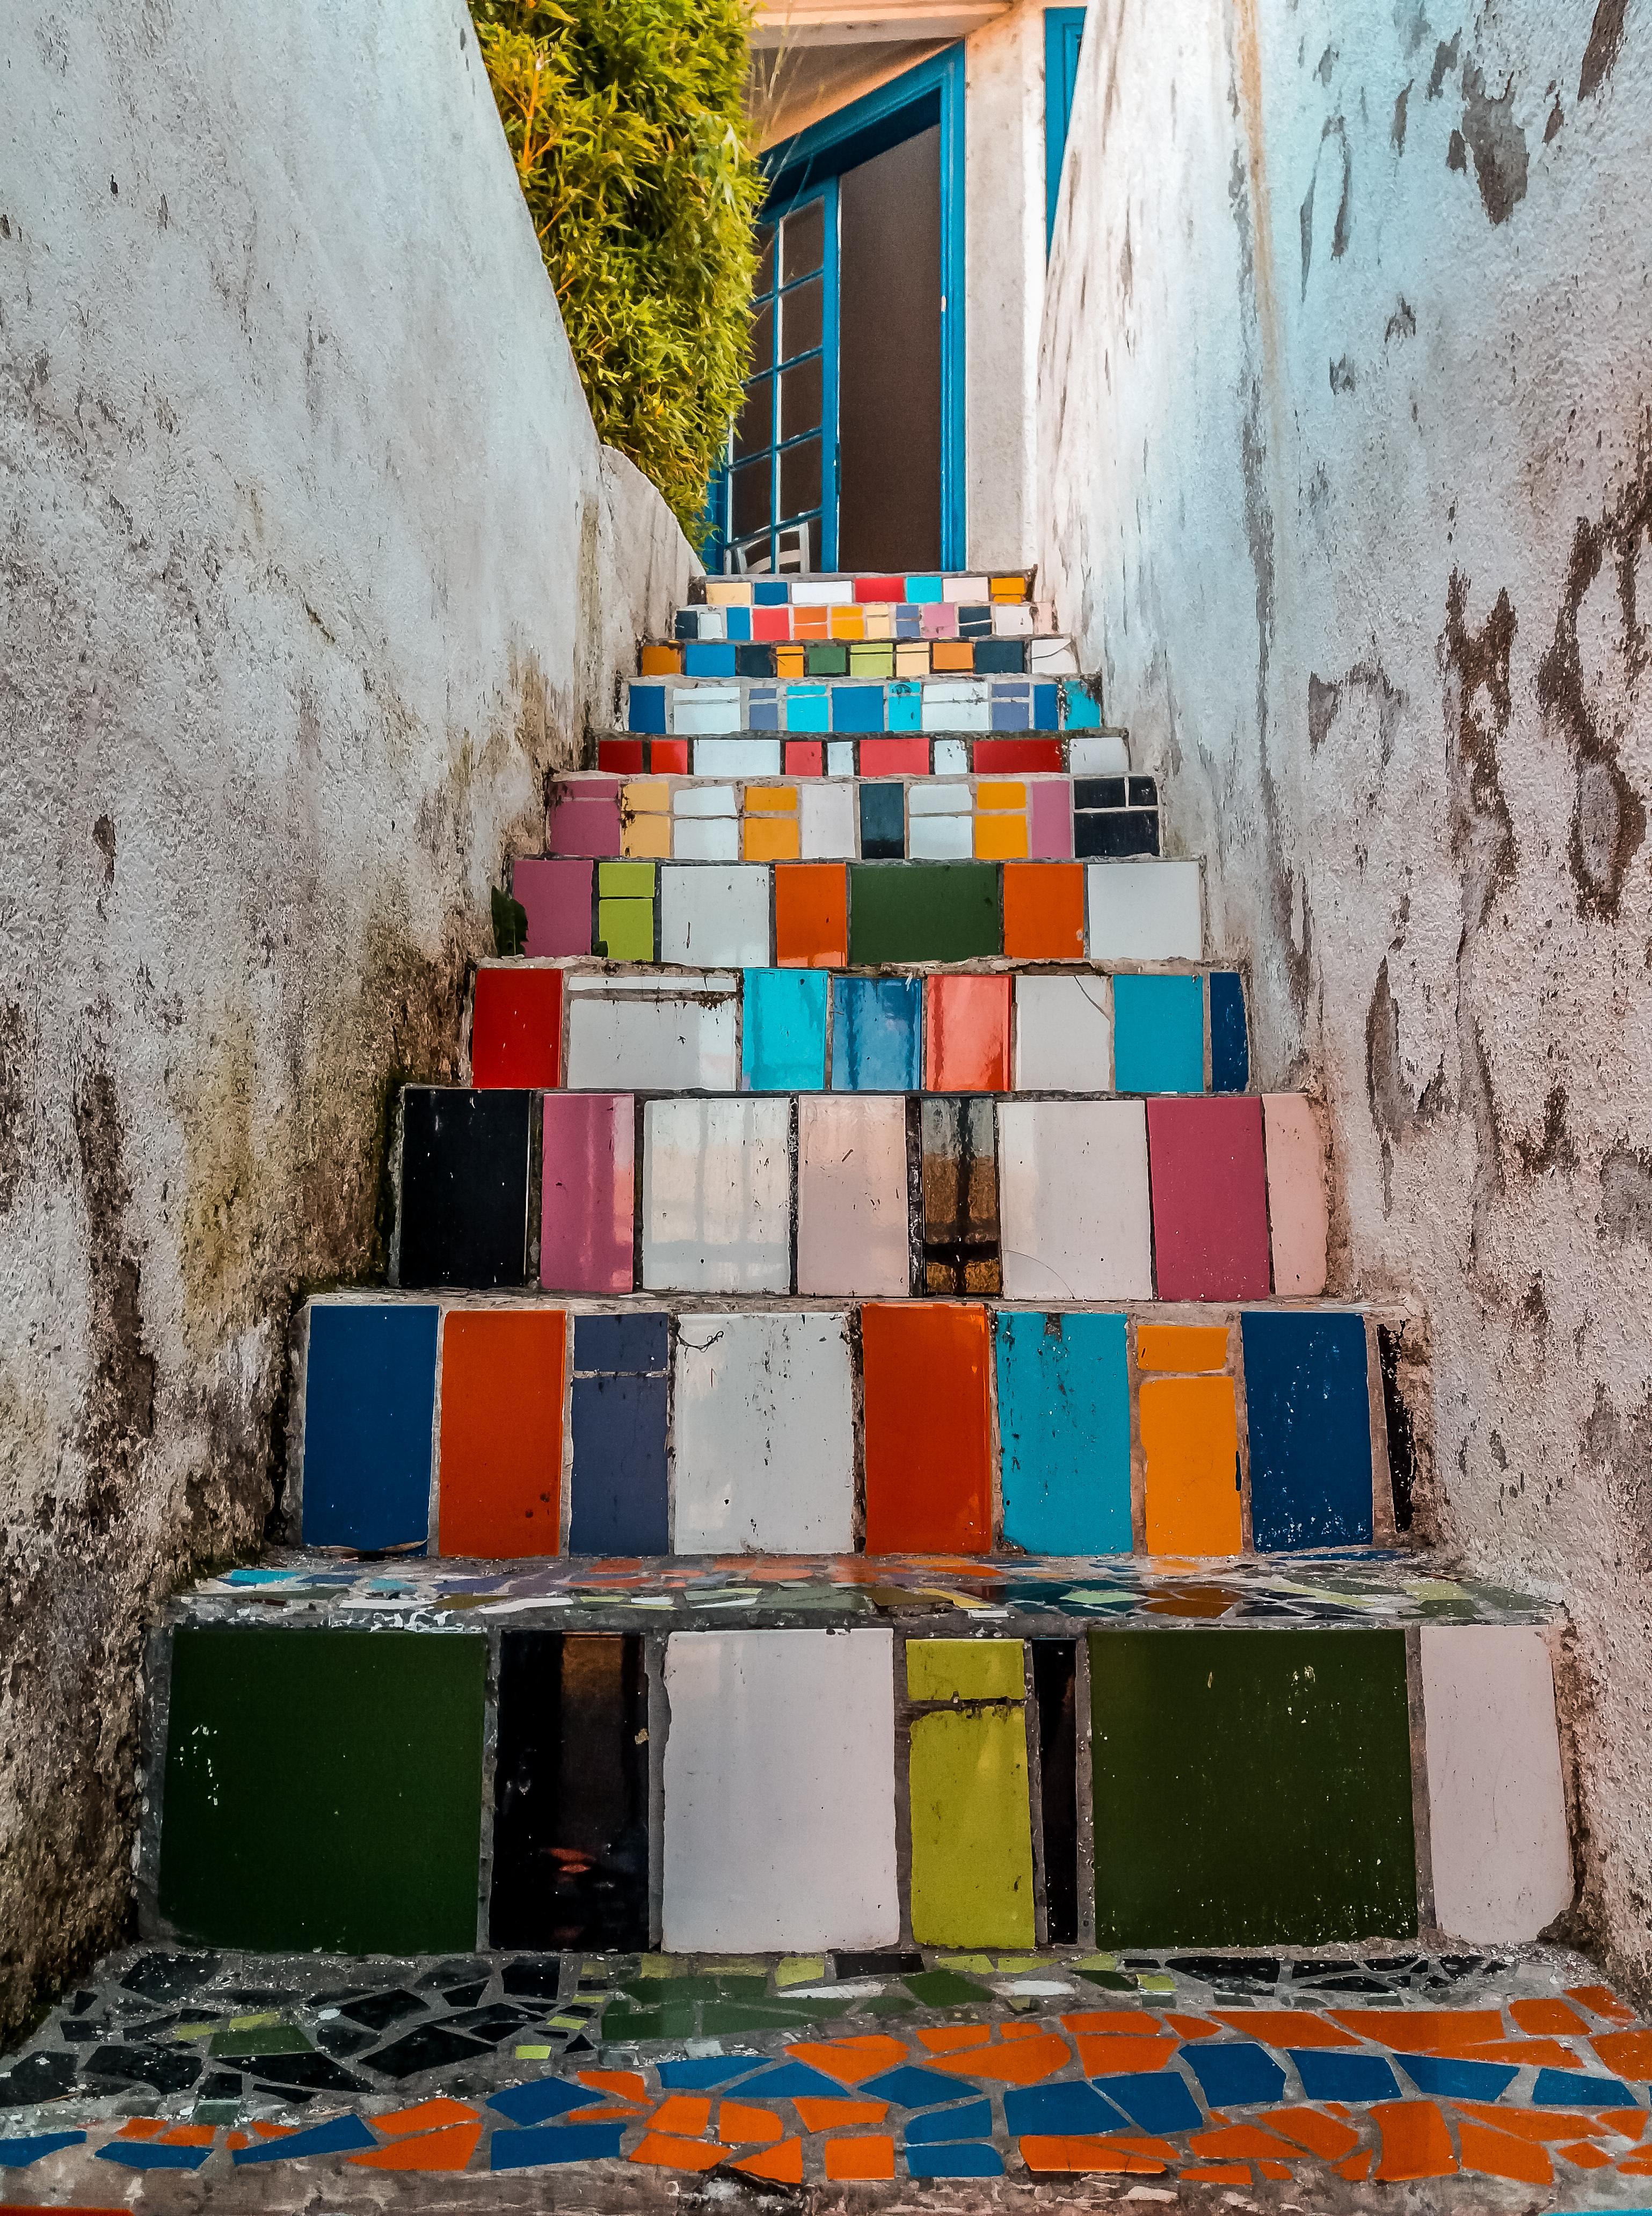 OC] [3077x4128] Colorful stairway in Valparaiso, Chile. iPhone X Wallpaper X Wallpaper HD